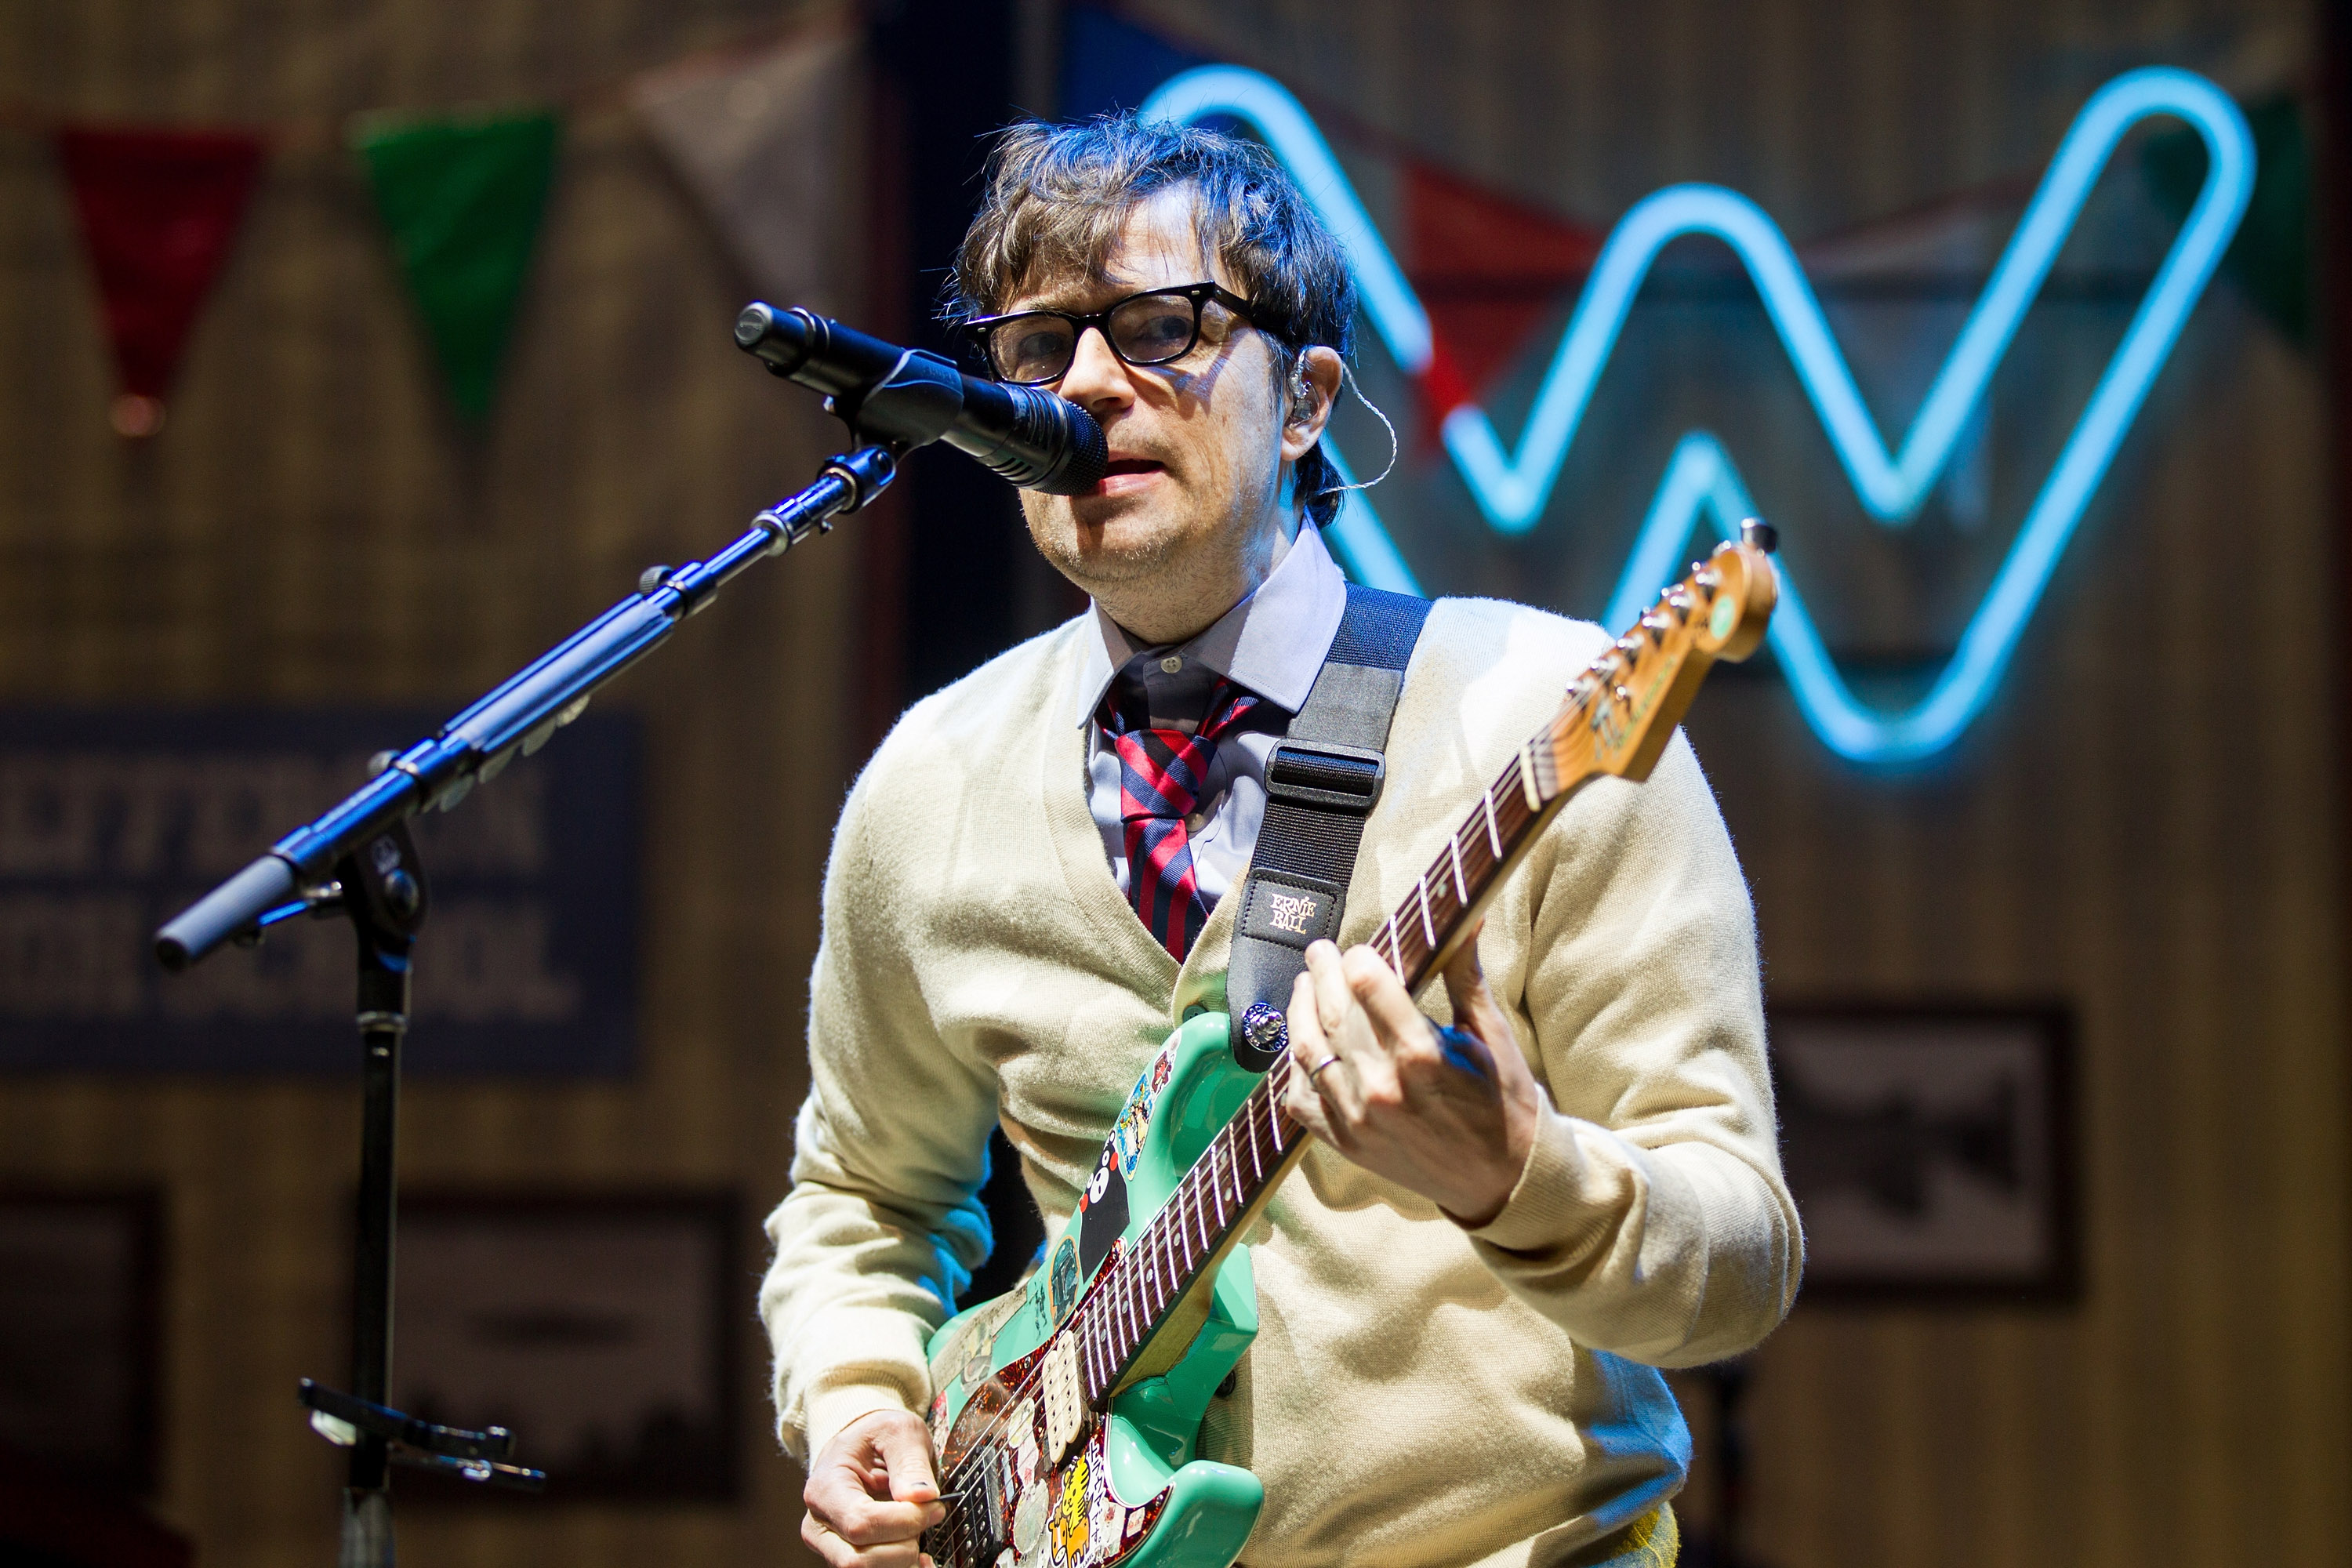 Weezer Playing 'Blue Album' In Full On Fall Tour